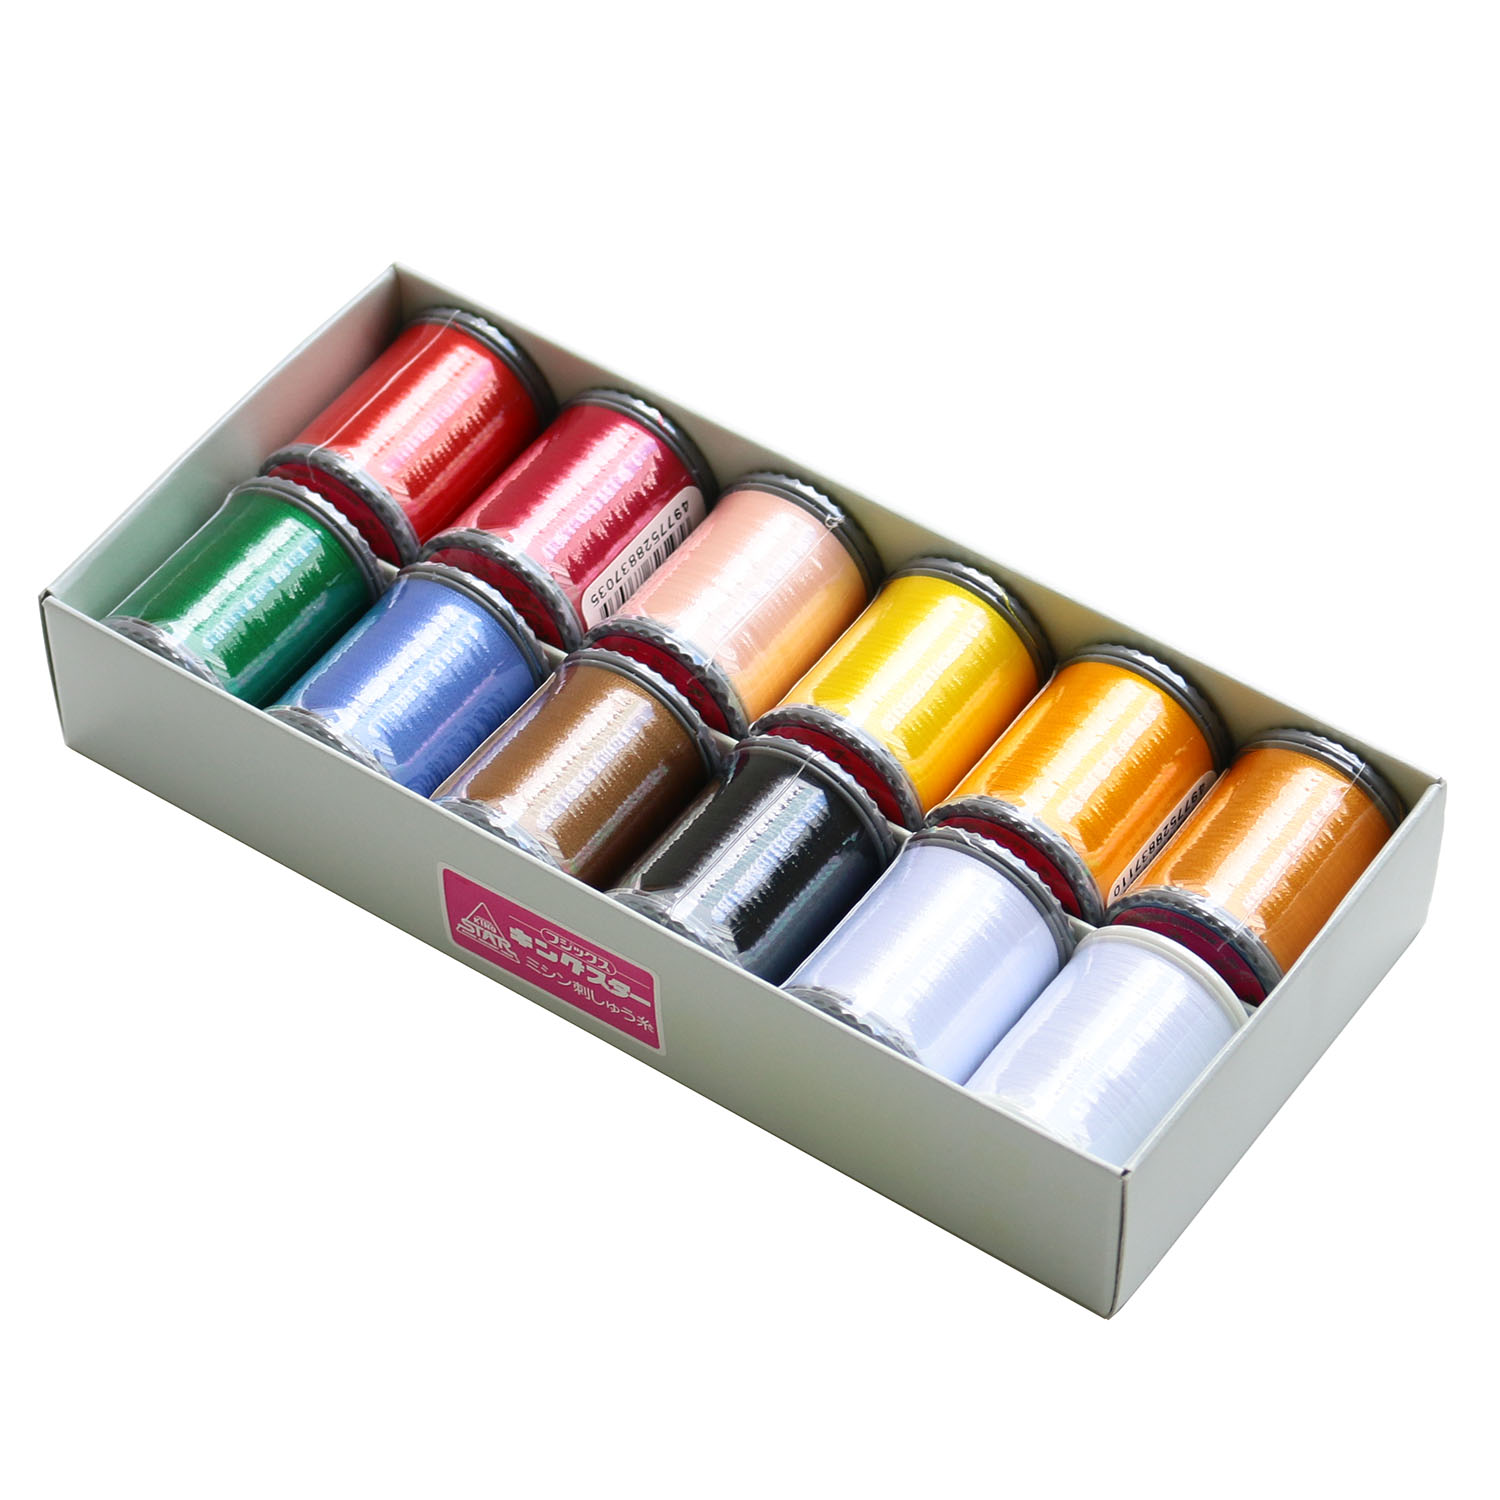 FK15493 King Star decorative sewing machine embroidery thread, 12 basic colors, starter set, 200m, 11 colors + under thread (set)